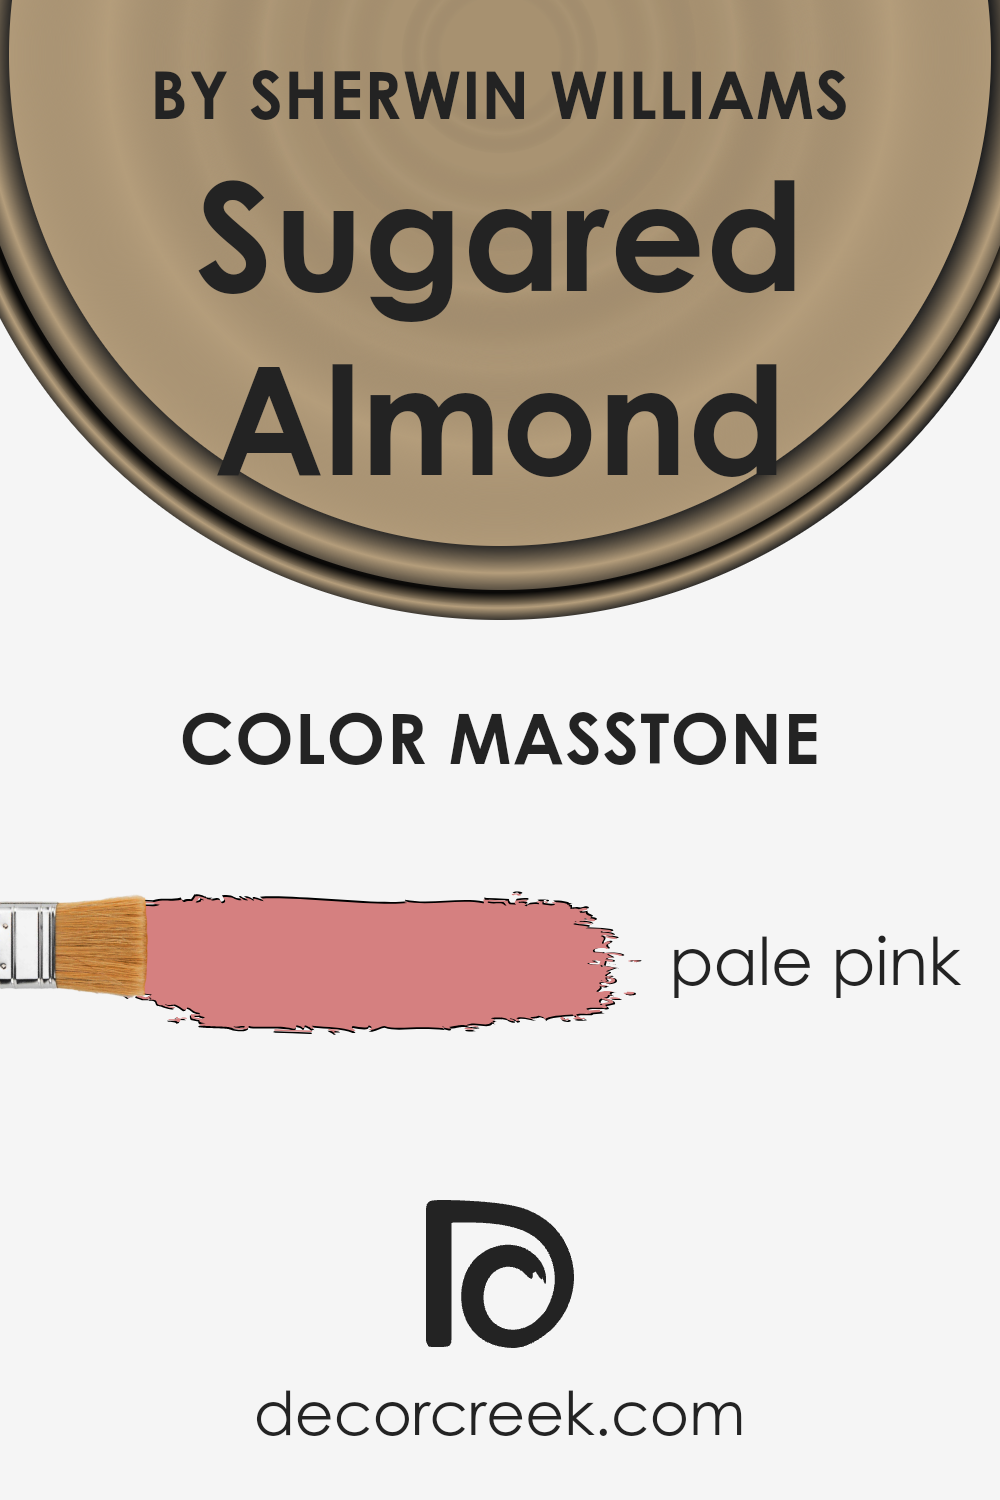 what_is_the_masstone_of_sugared_almond_sw_9537